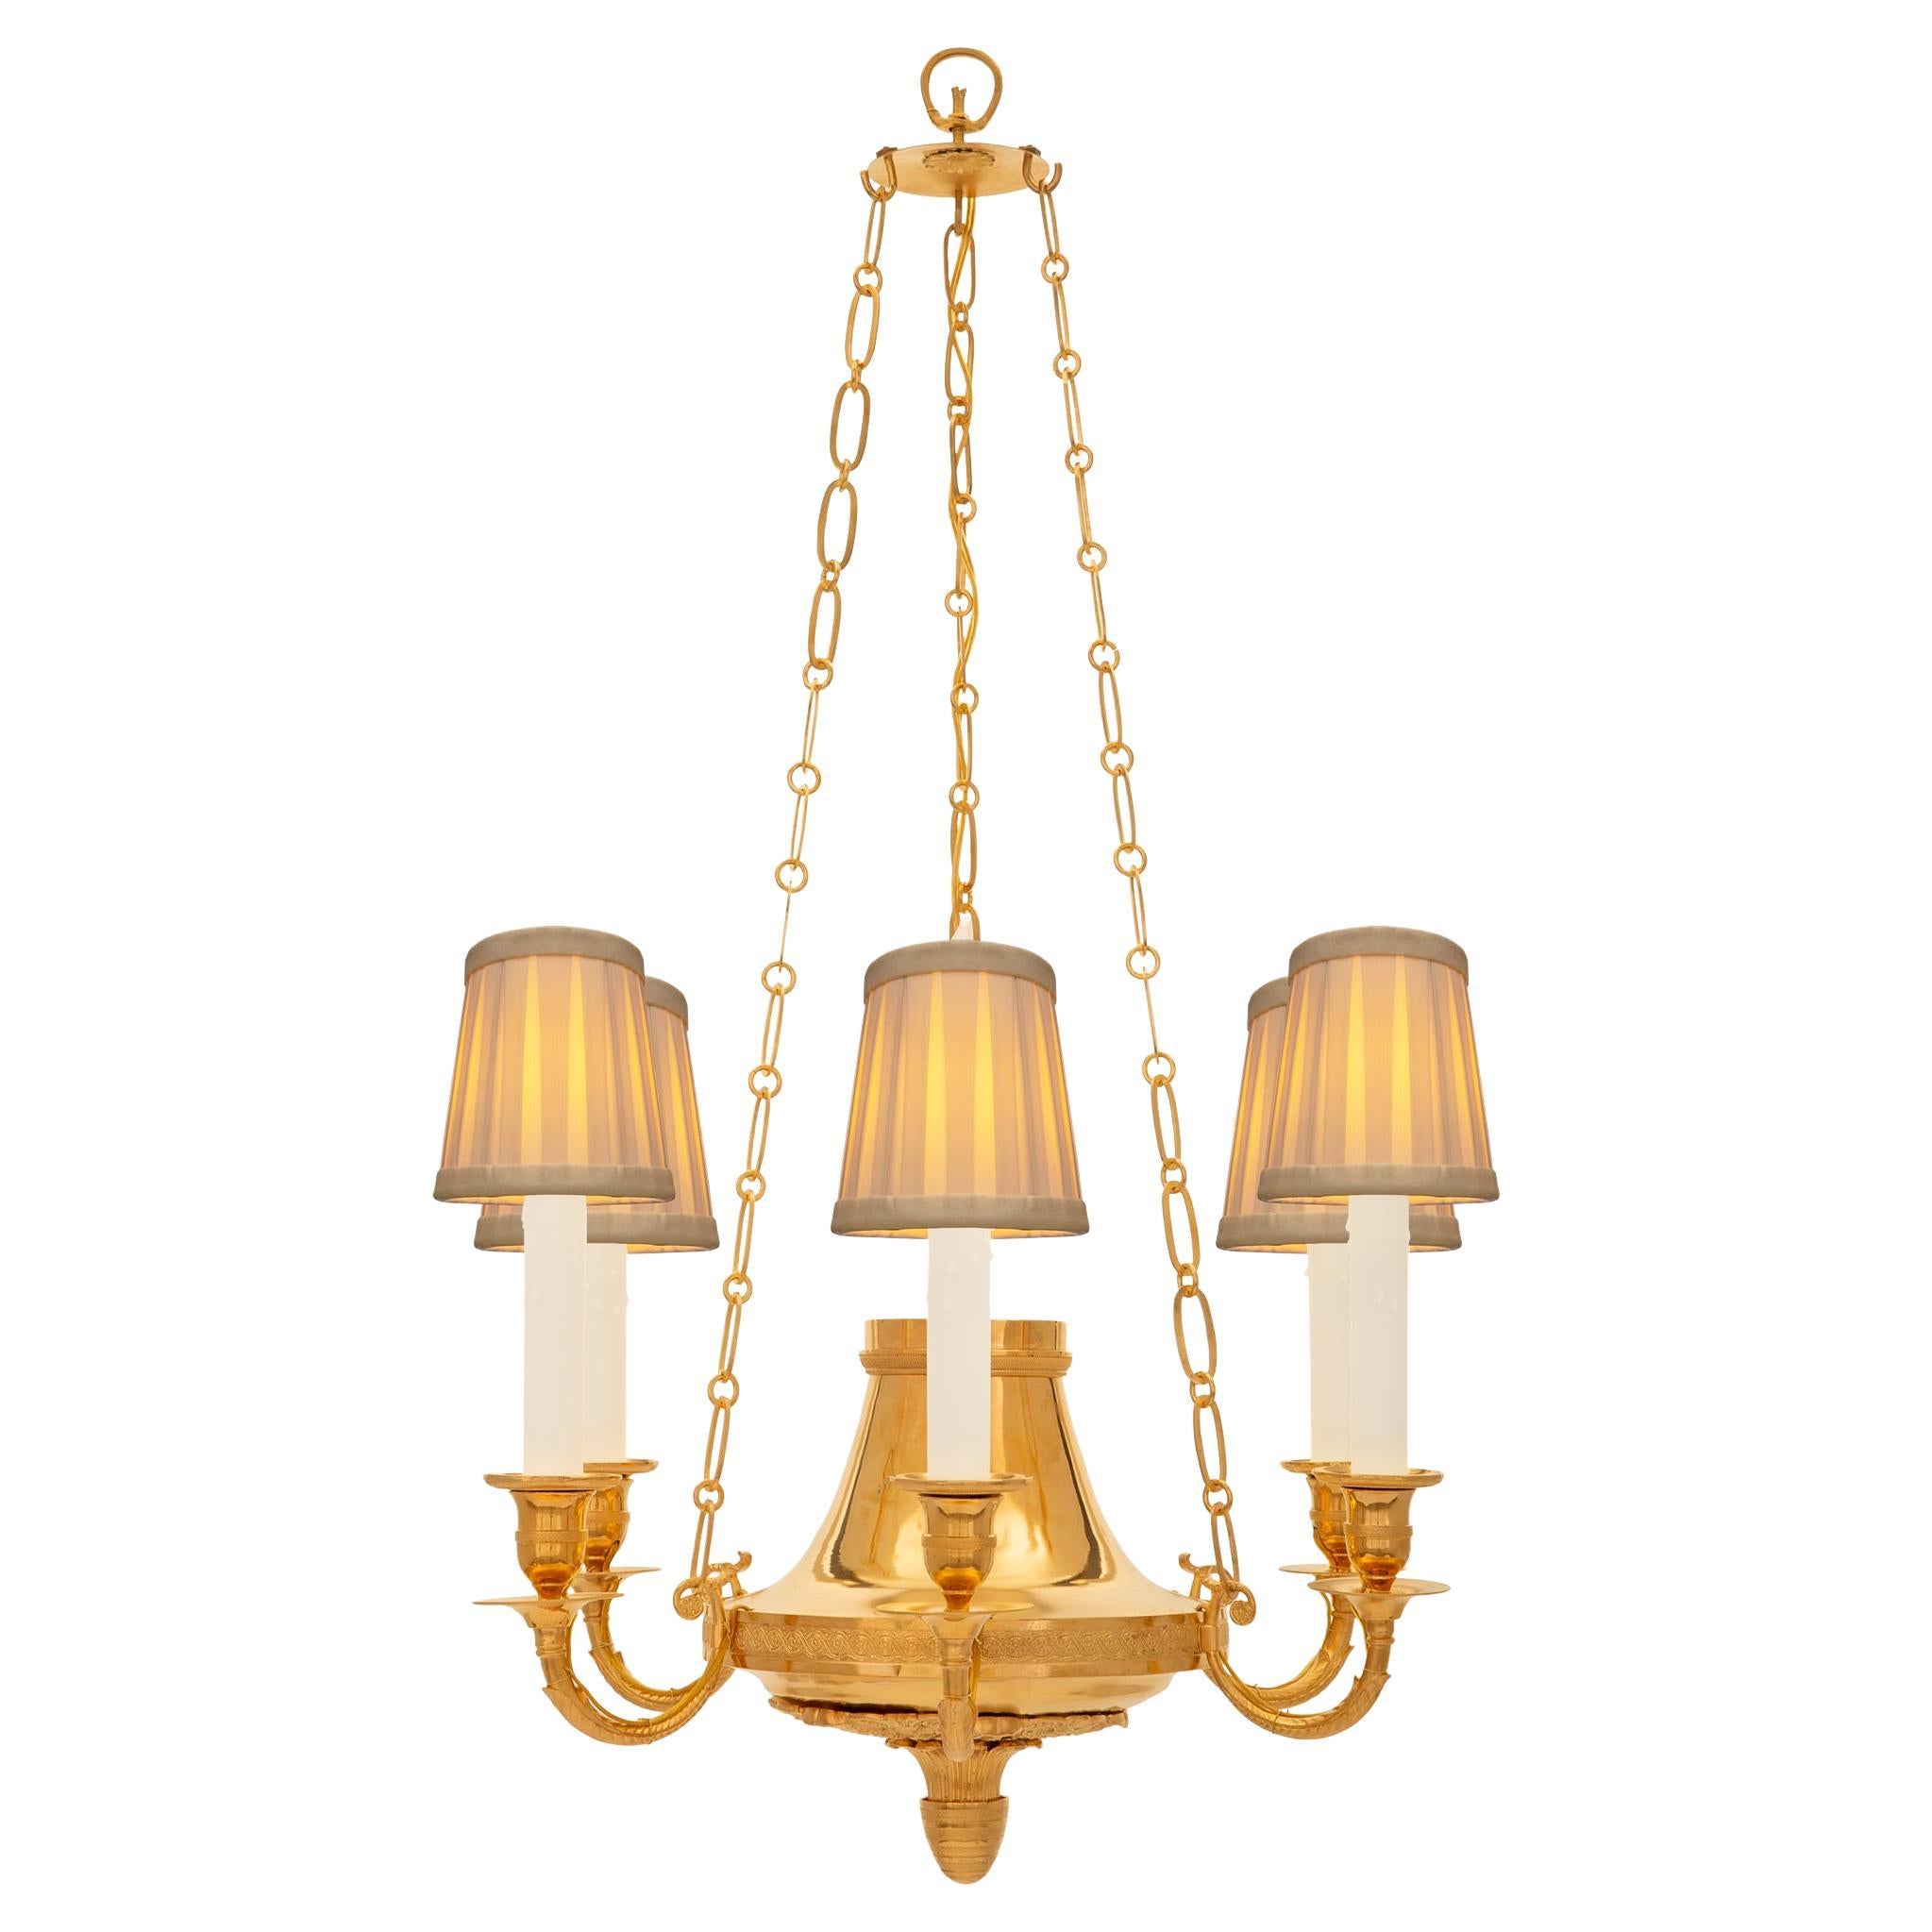 Baltic Early 19th Century Neo-Classical St. Ormolu Chandelier For Sale